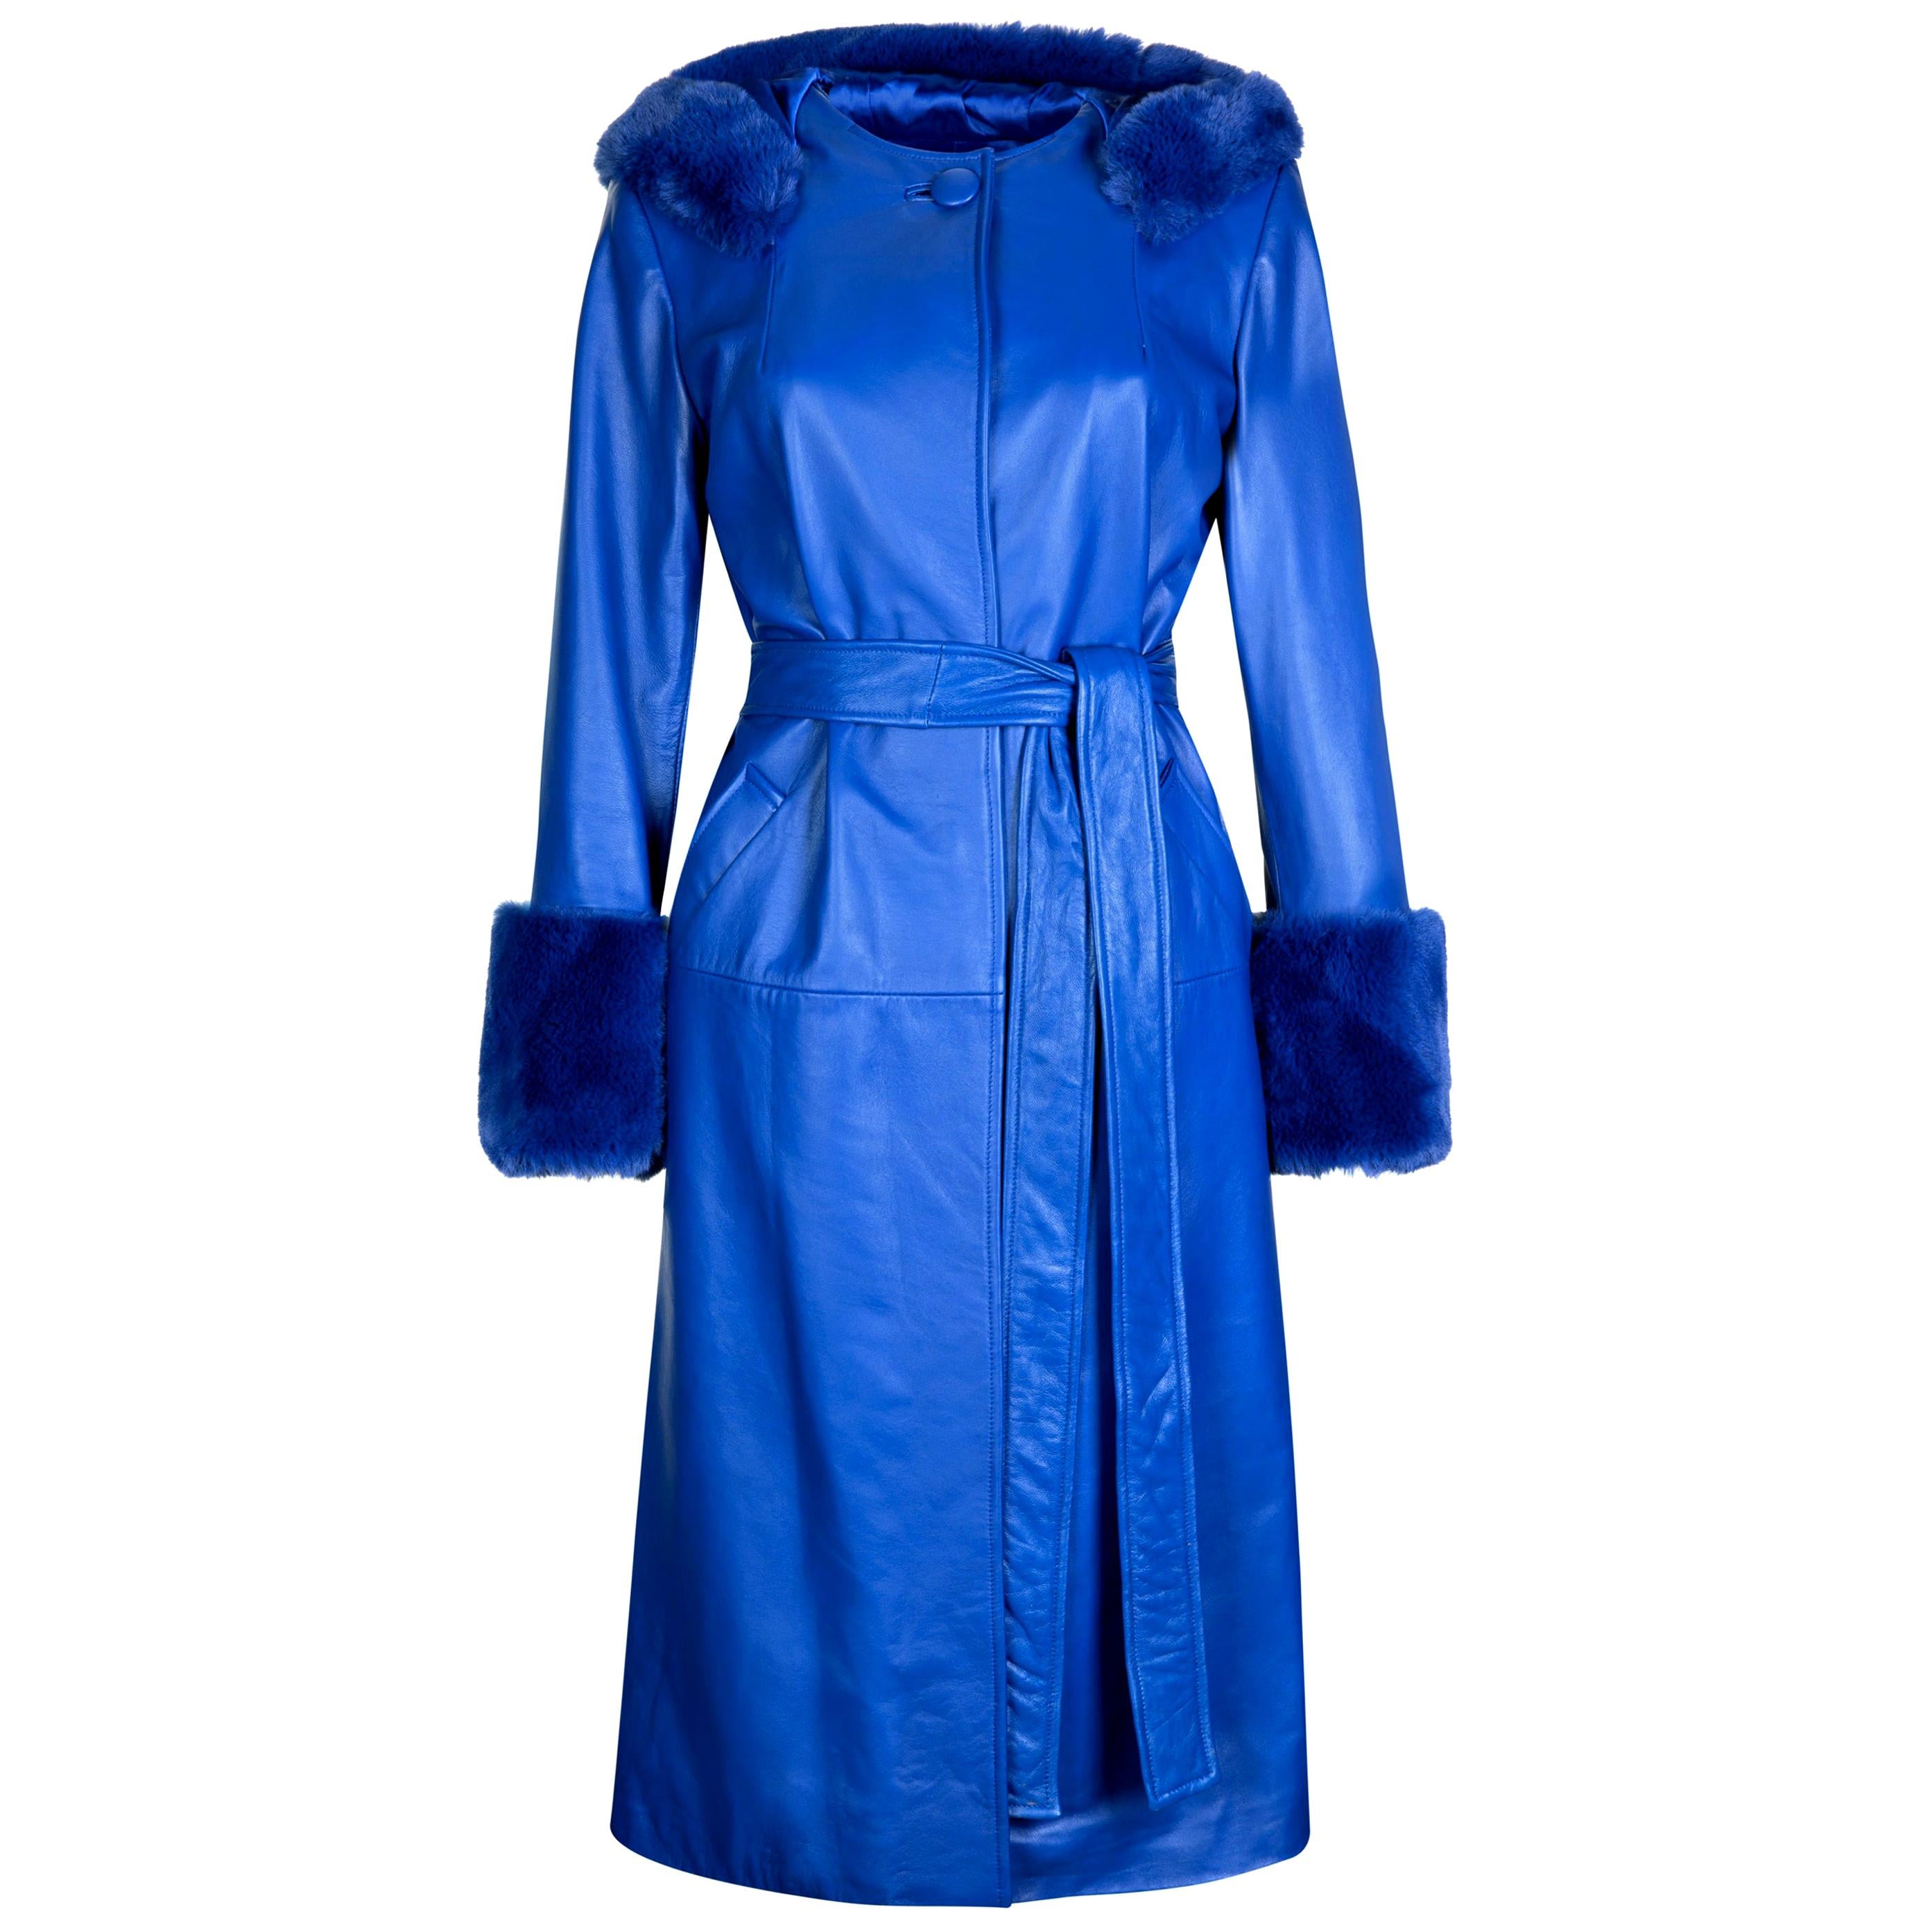 Verheyen London Hooded Leather Trench Coat in Blue with Faux Fur - Size uk 6